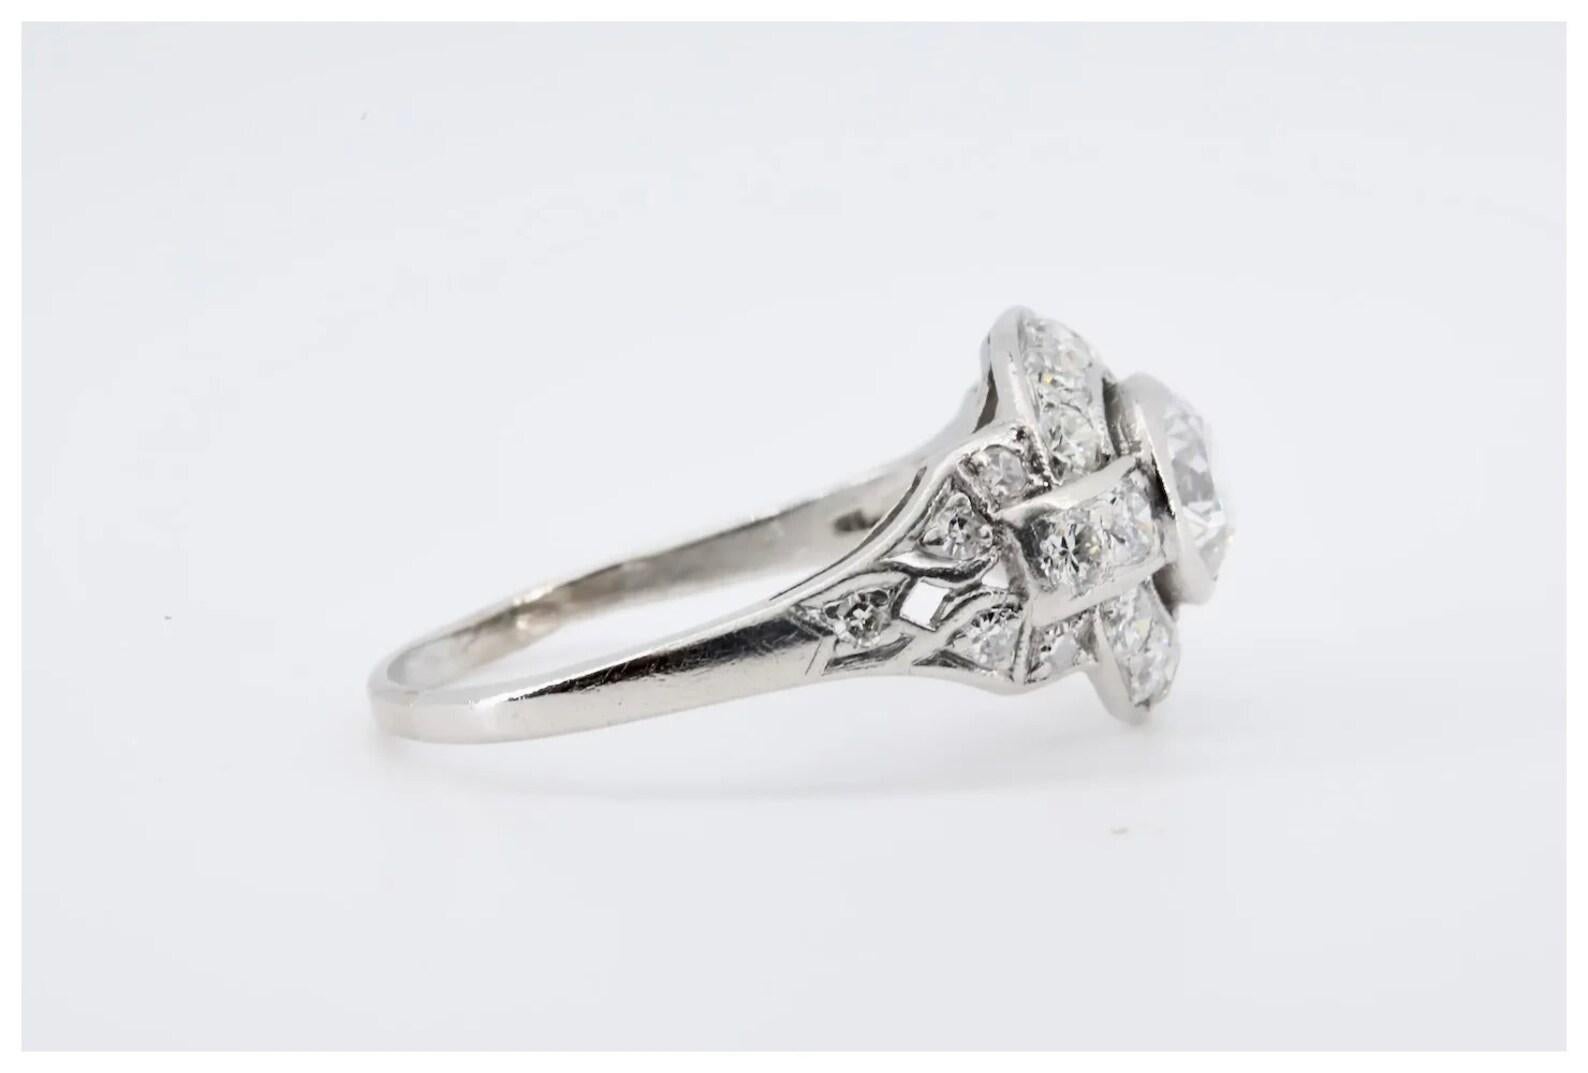 A high fashion Art Deco period old European cut diamond halo engagement ring in platinum.

Centered by a 0.75 carat old European cut diamond of G color, and SI1 clarity.

The mounting set throughout with 24 old European cut diamonds. Graded as G